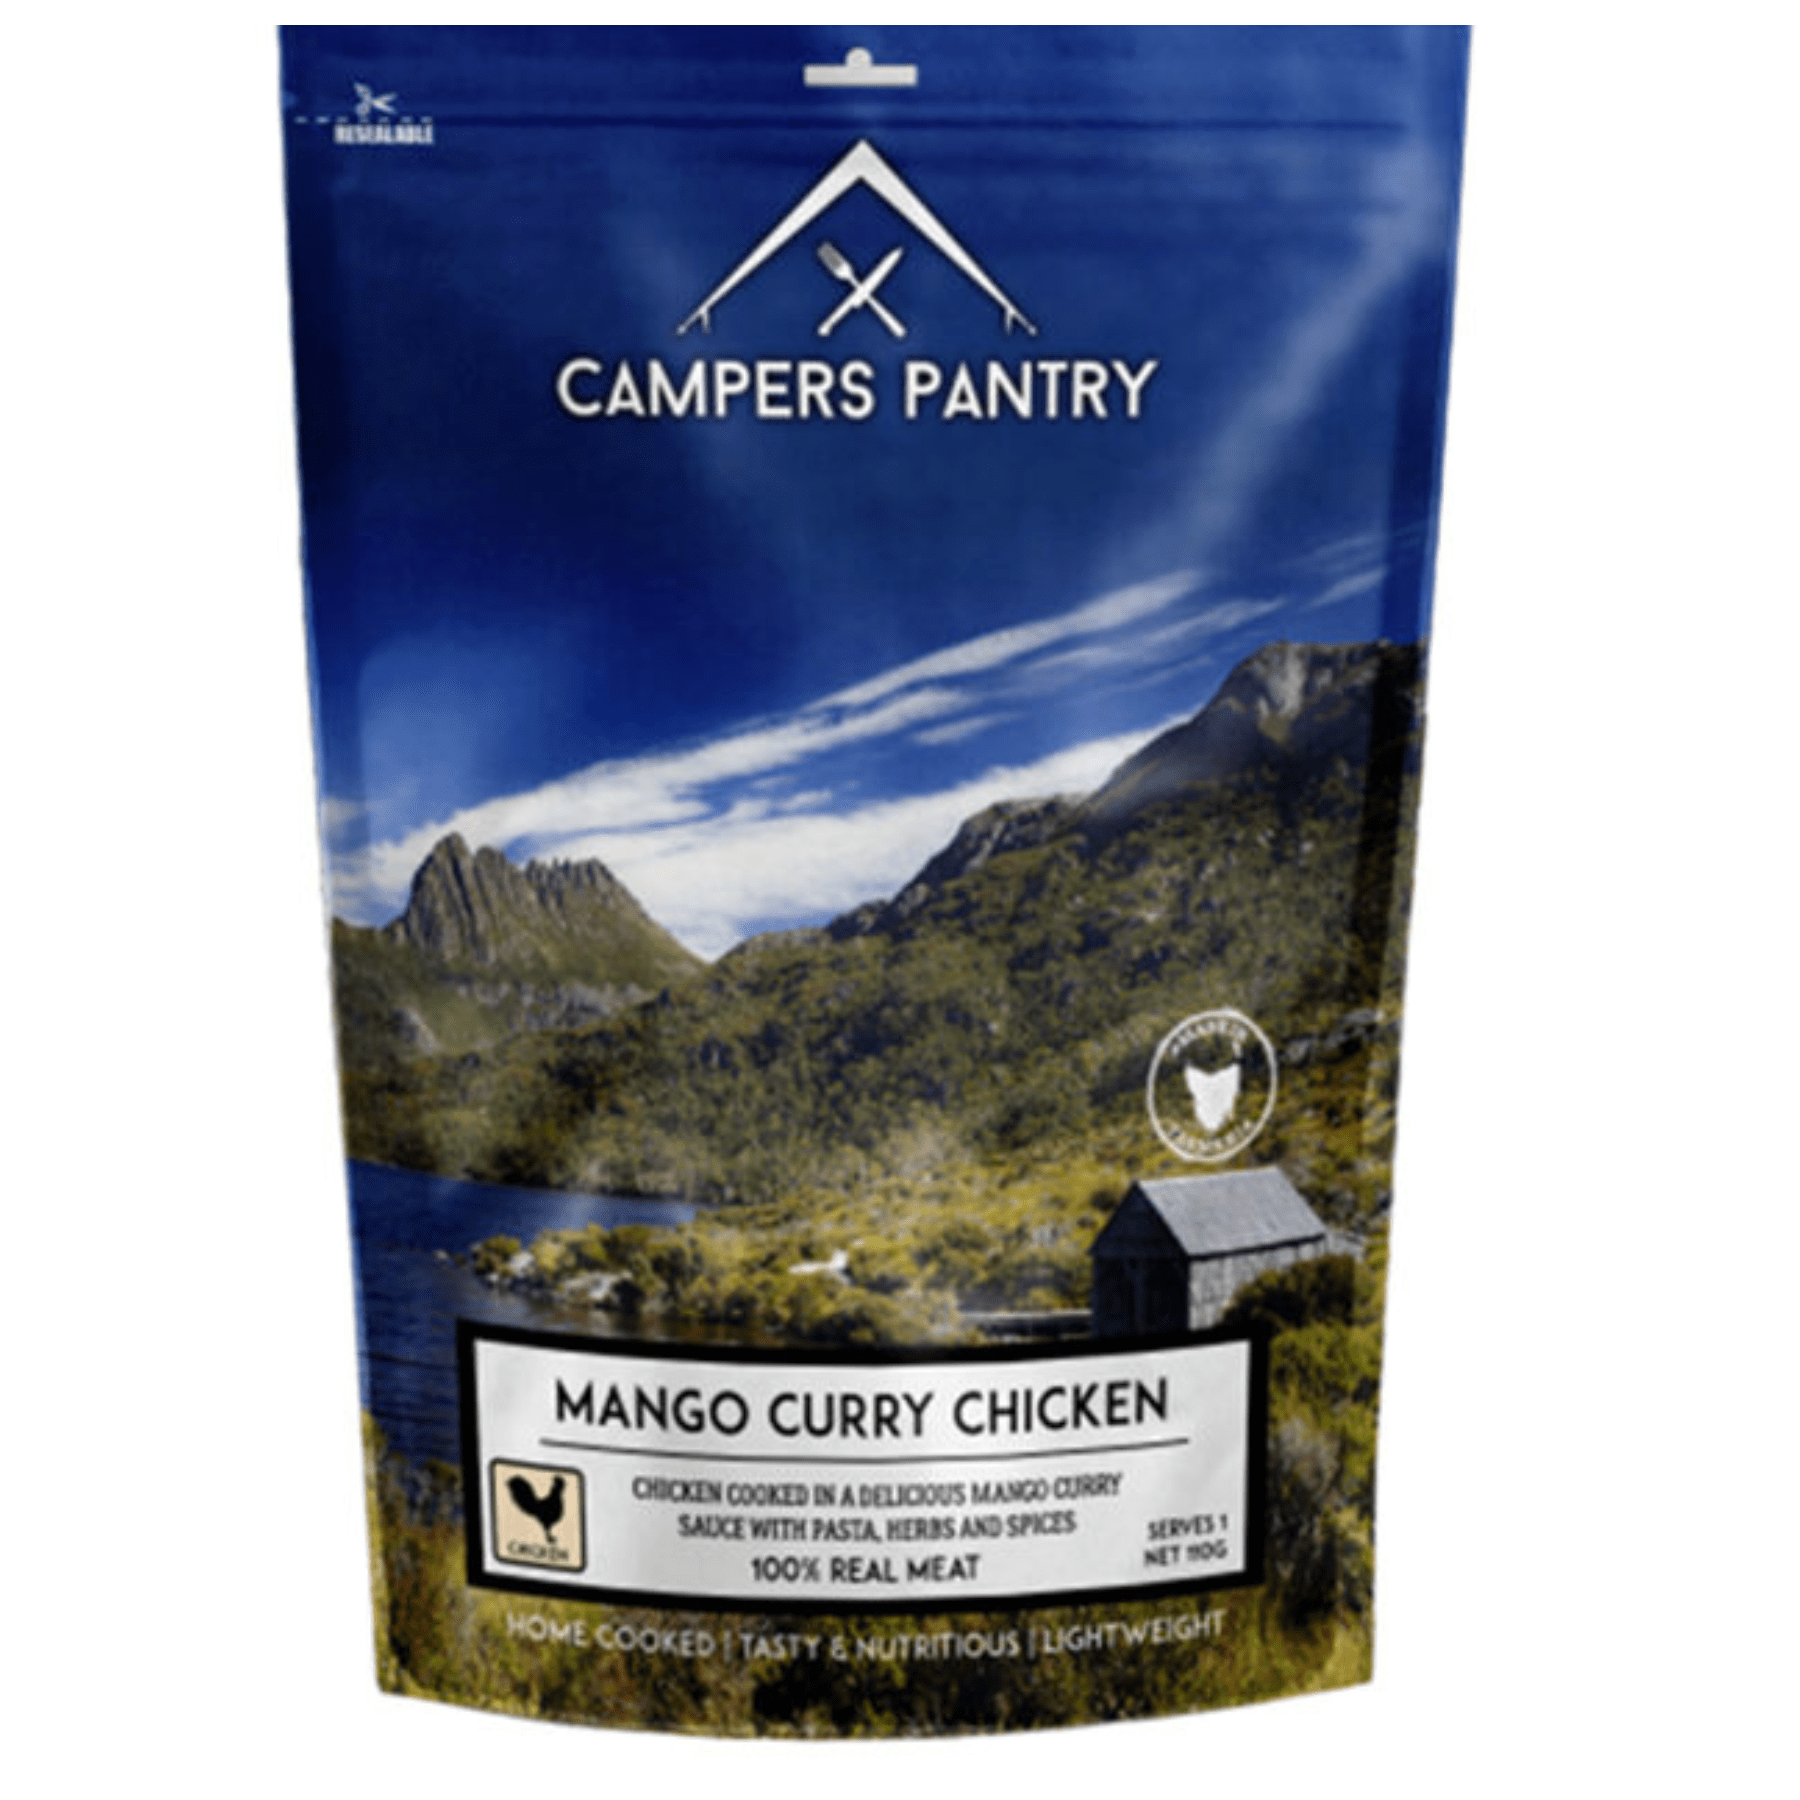 campers pantry Dehydrated Meals Single Serve / Mango Curry Chicken Freeze-dried Dinner Meals CPMCC11017